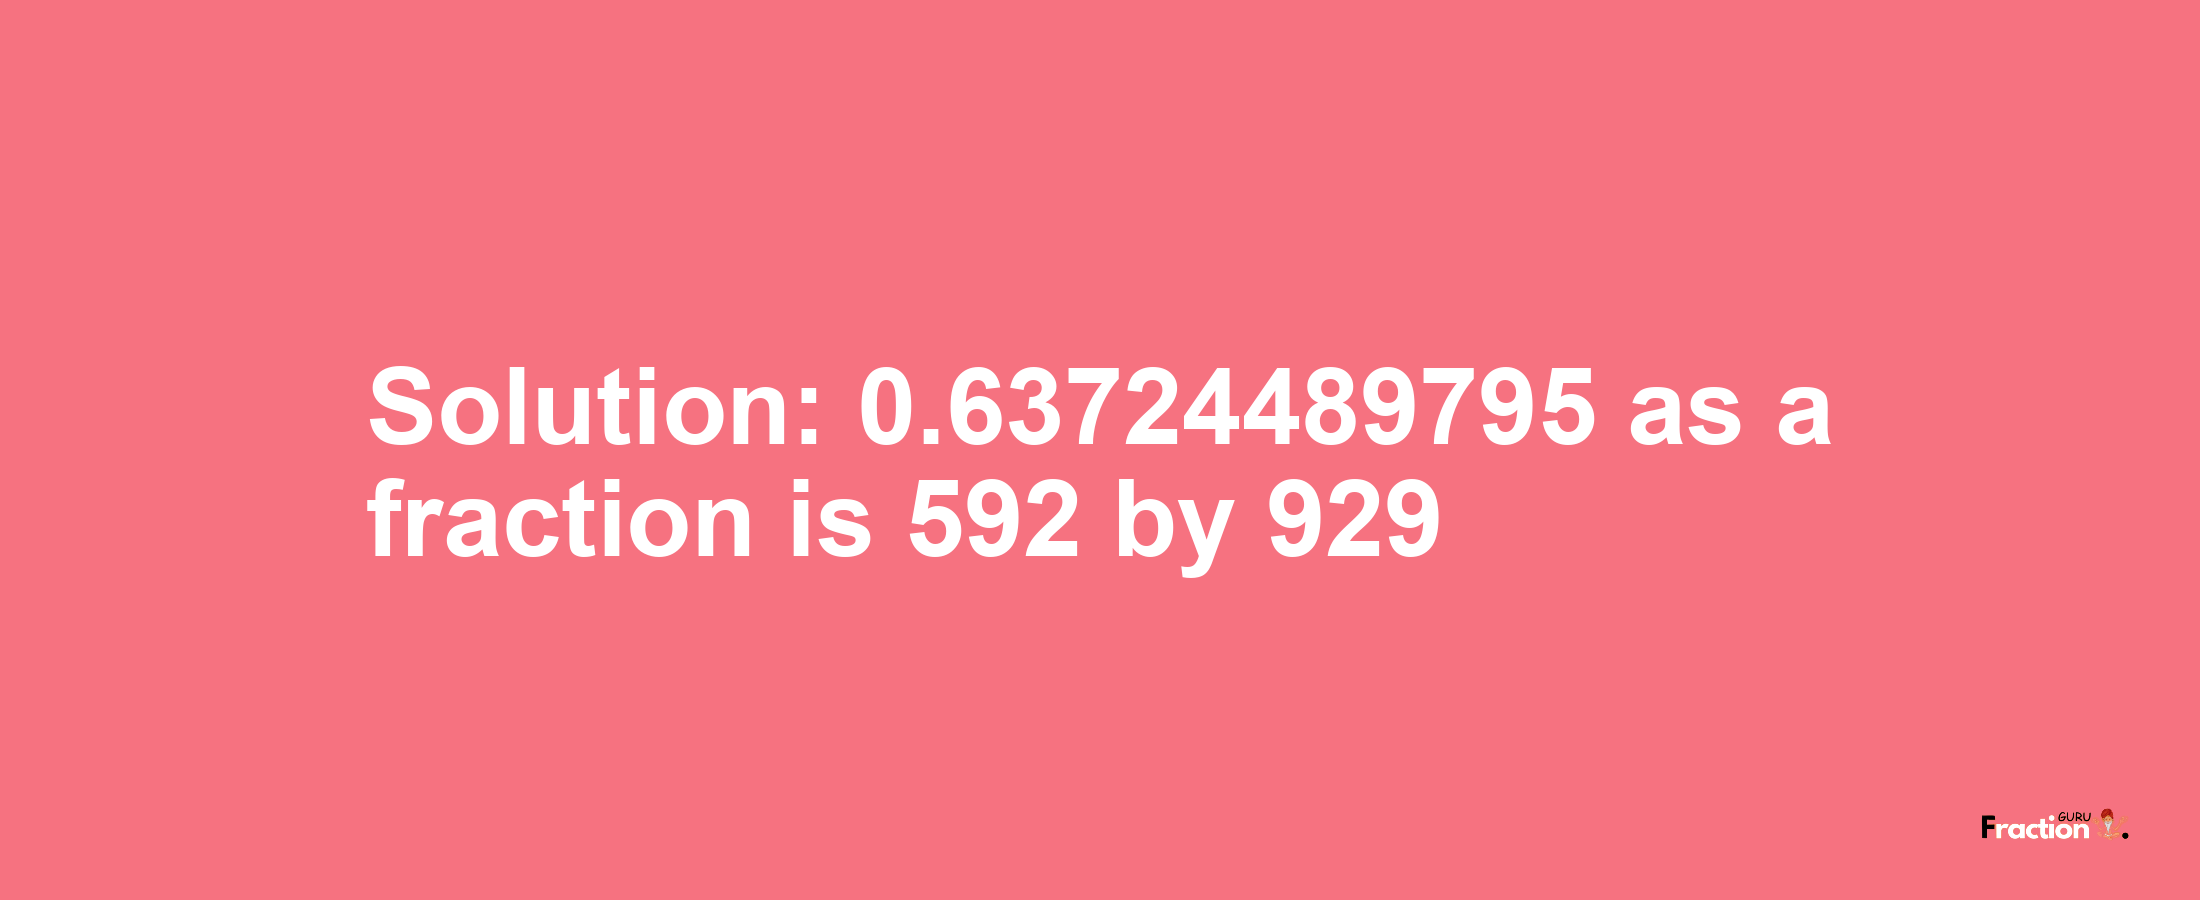 Solution:0.63724489795 as a fraction is 592/929